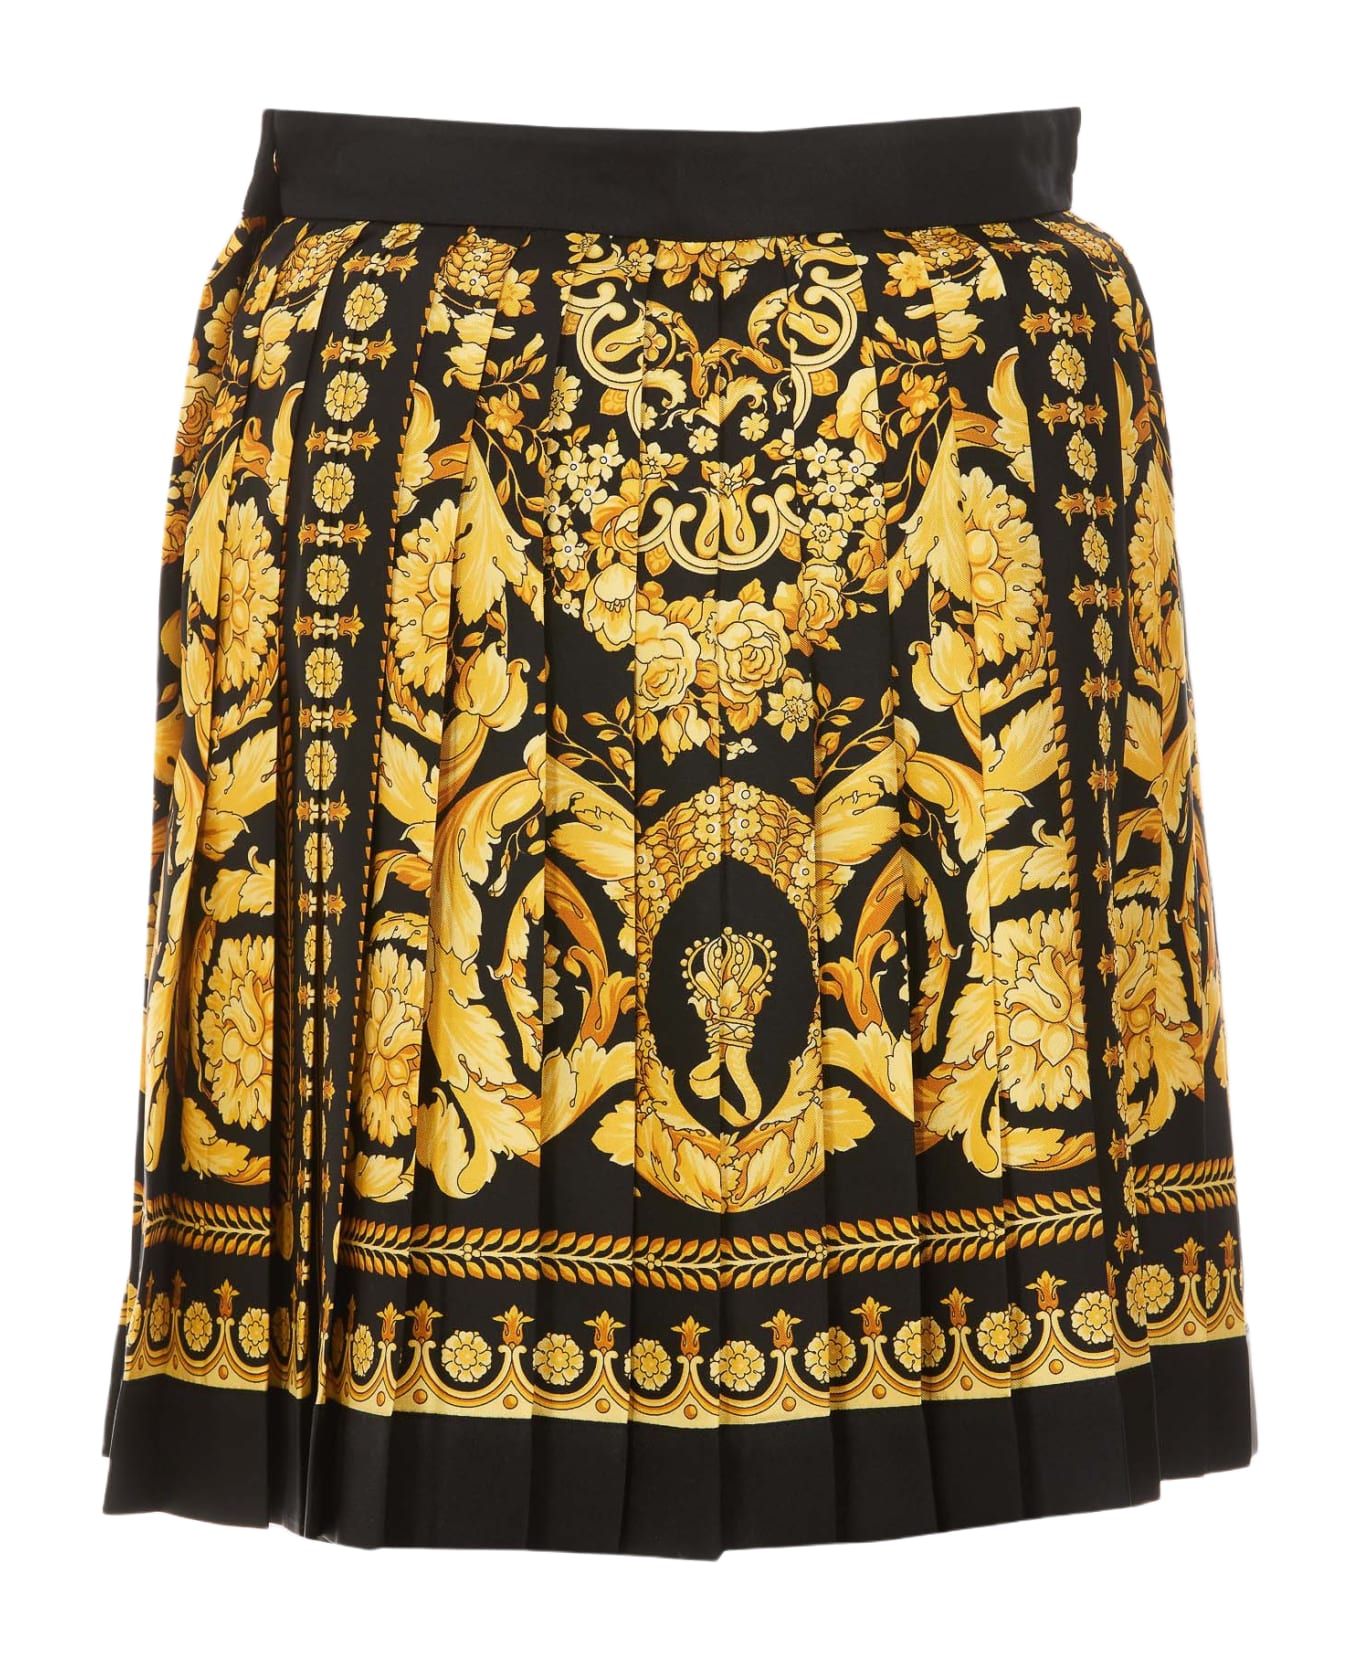 Versace Black And Gold Cotton Skirt - Black